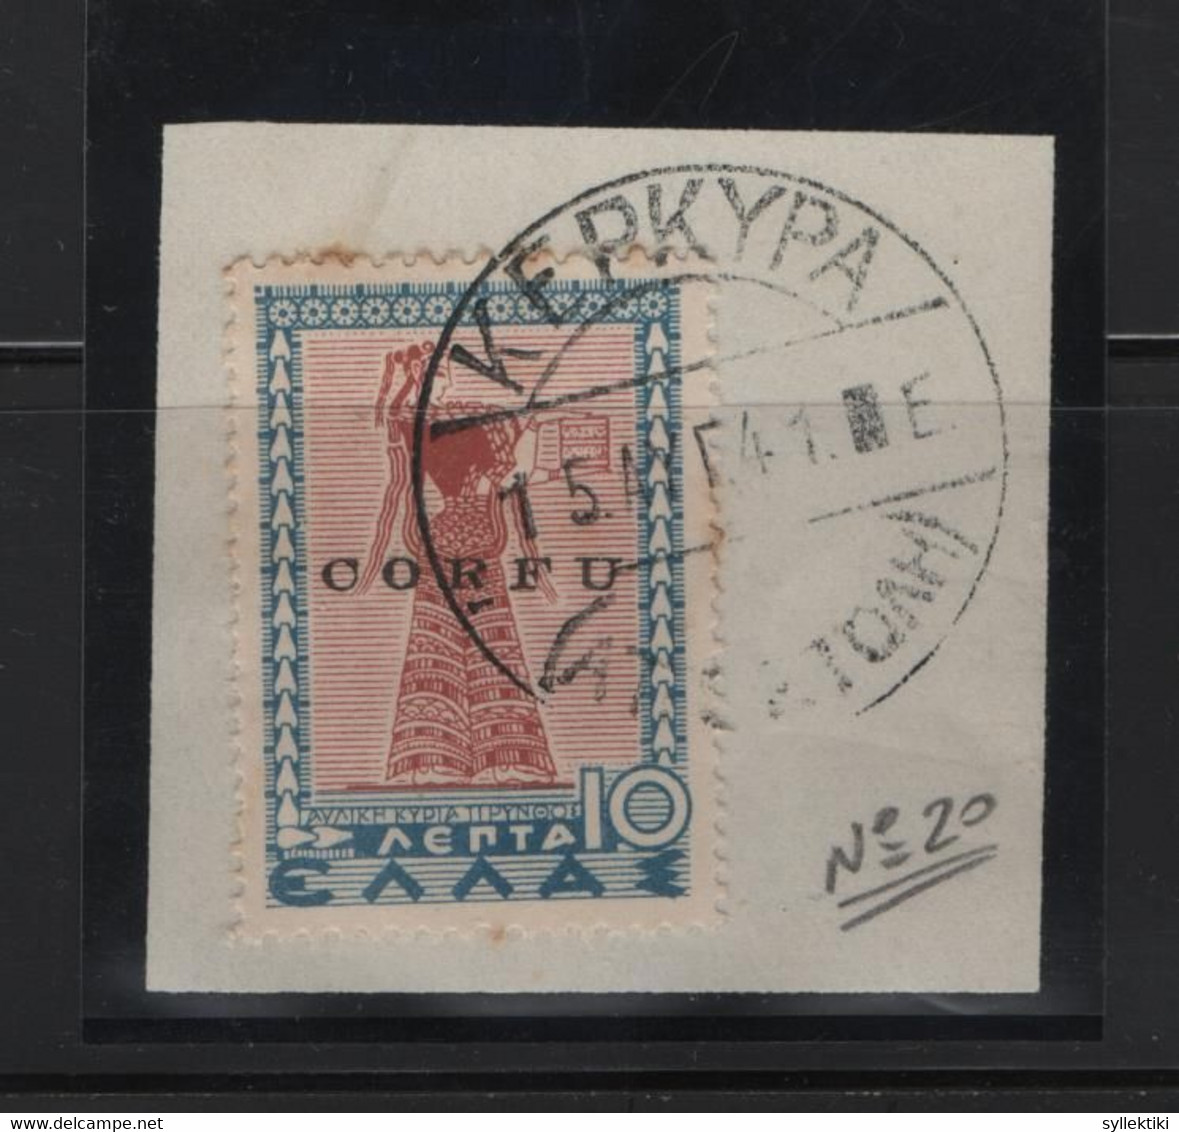 GREECE CORFU 1941 10 LEPTA ΤΙΡΥΝΘΑ USED STAMP ON PIECE  THE STAMP IS GENUINE AS, THE POSTMARK COVERS ON ONE POINT THE OV - Isole Ioniche